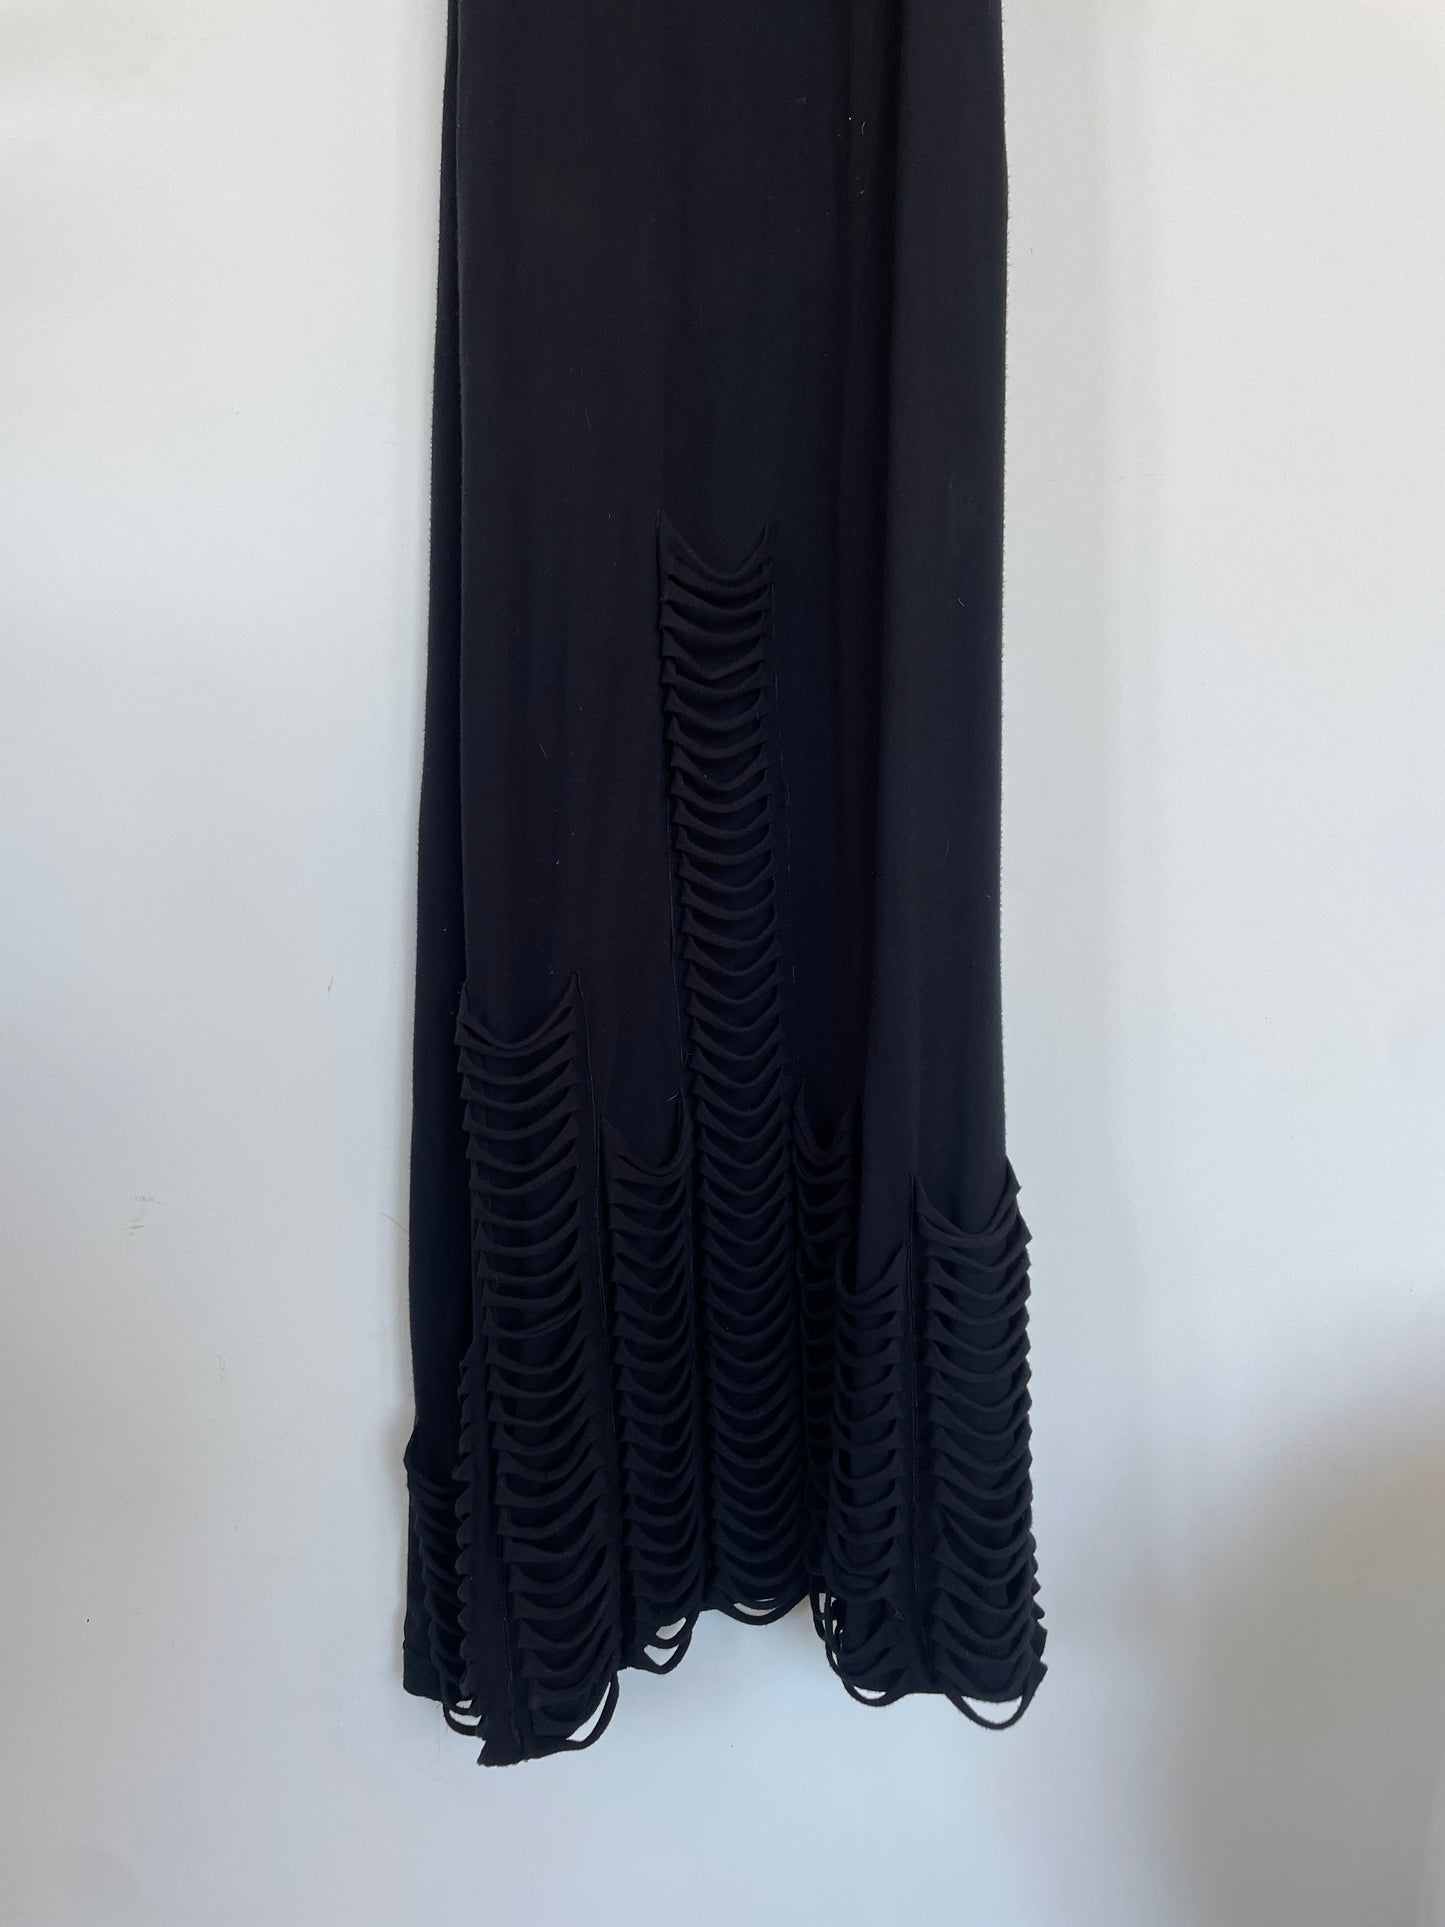 Jean Paul Gaultier Jeans 90s stretchy black maxi dress with fringes at bottom